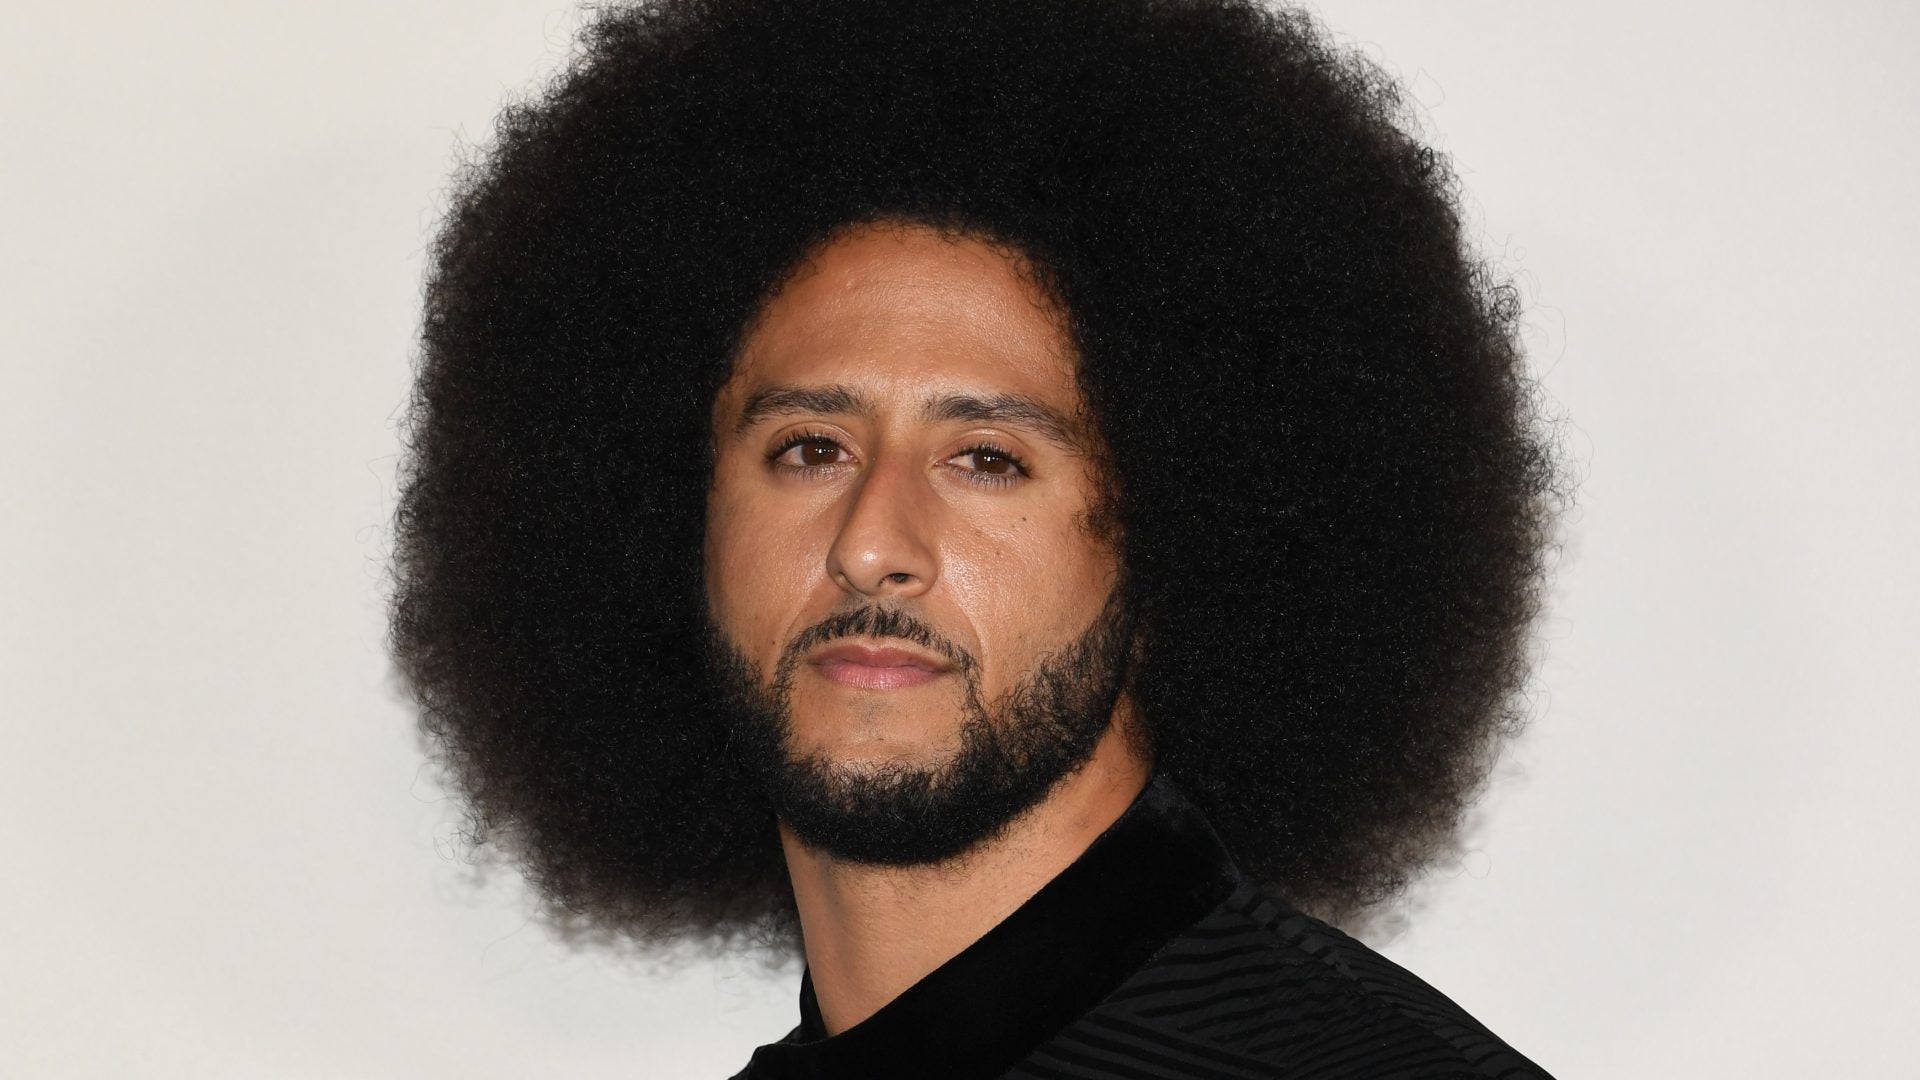 Colin Kaepernick Launches “The Autopsy Initiative” to Families Who Experienced “Police-Related” Deaths